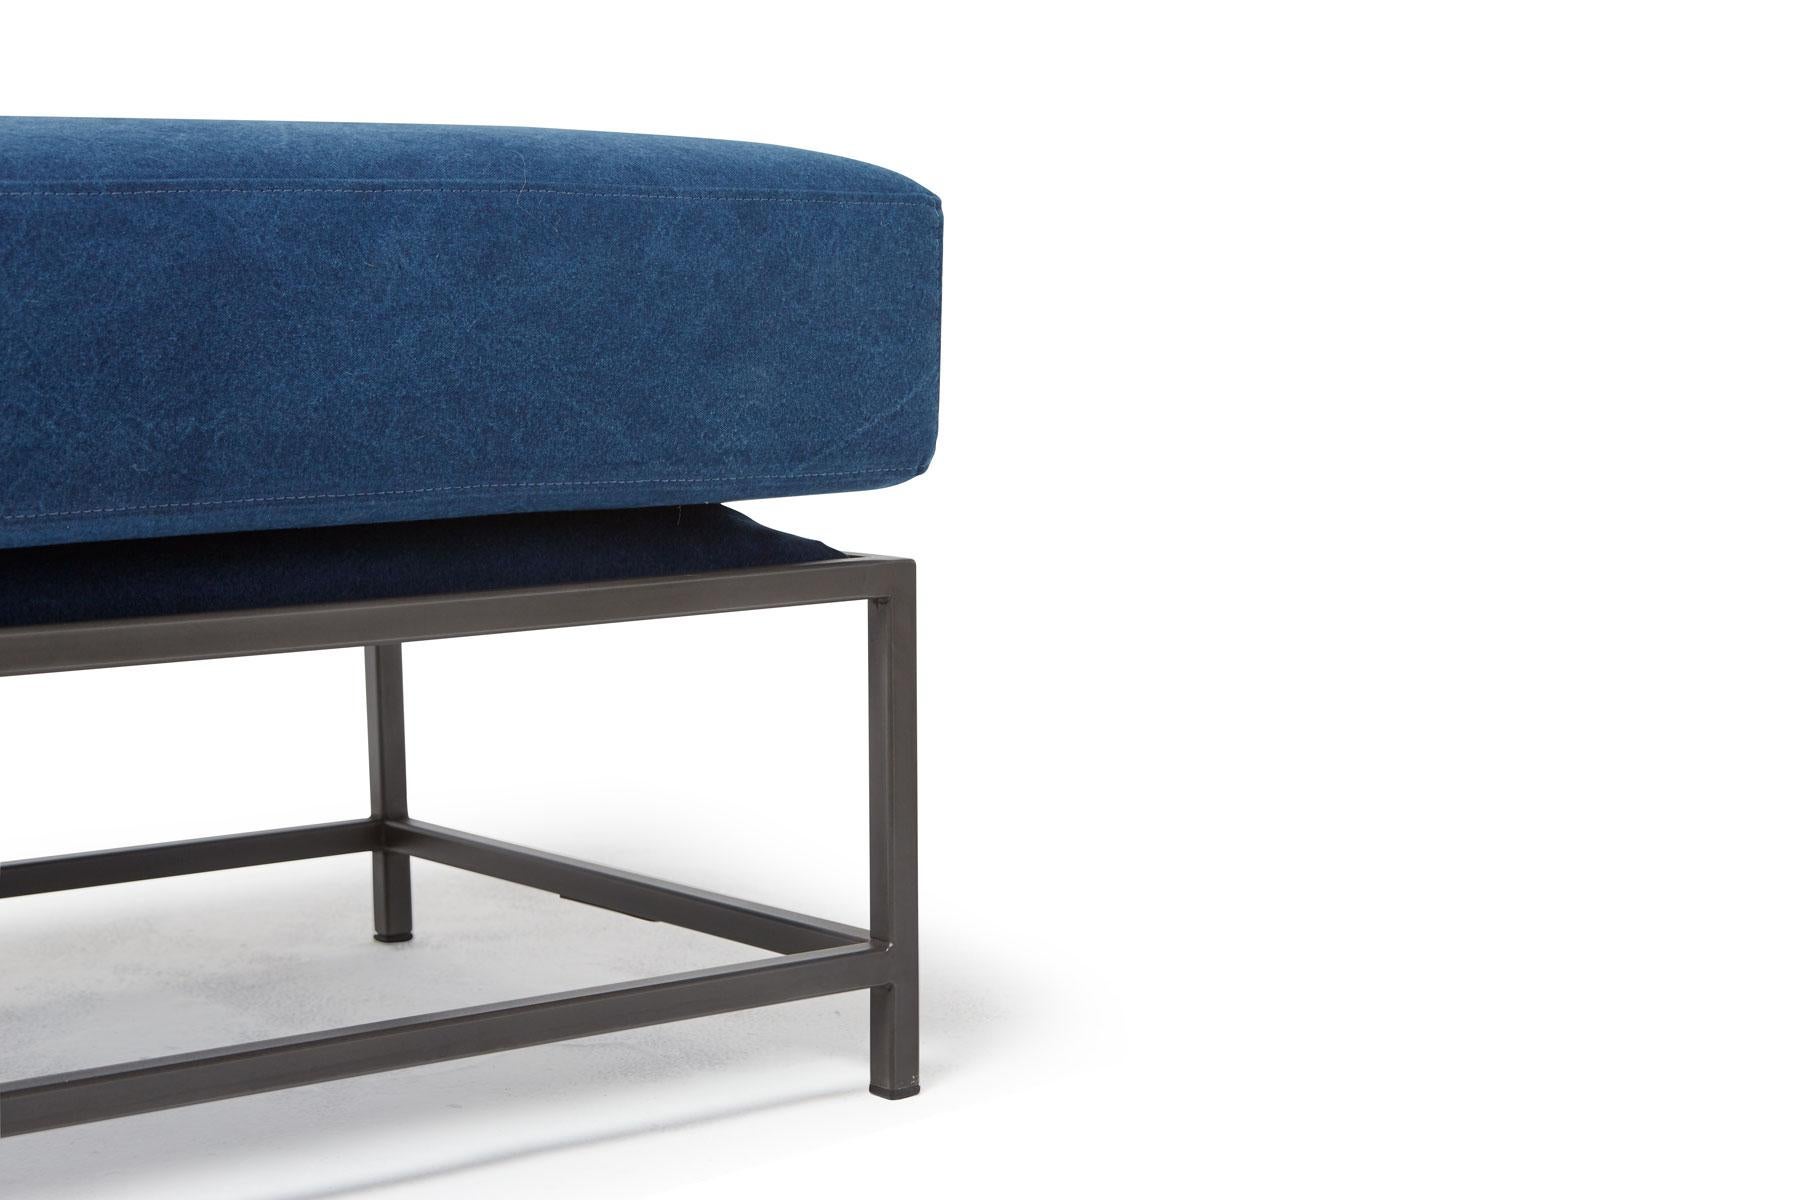 American Hand-Dyed Indigo Canvas and Blackened Steel Ottoman For Sale